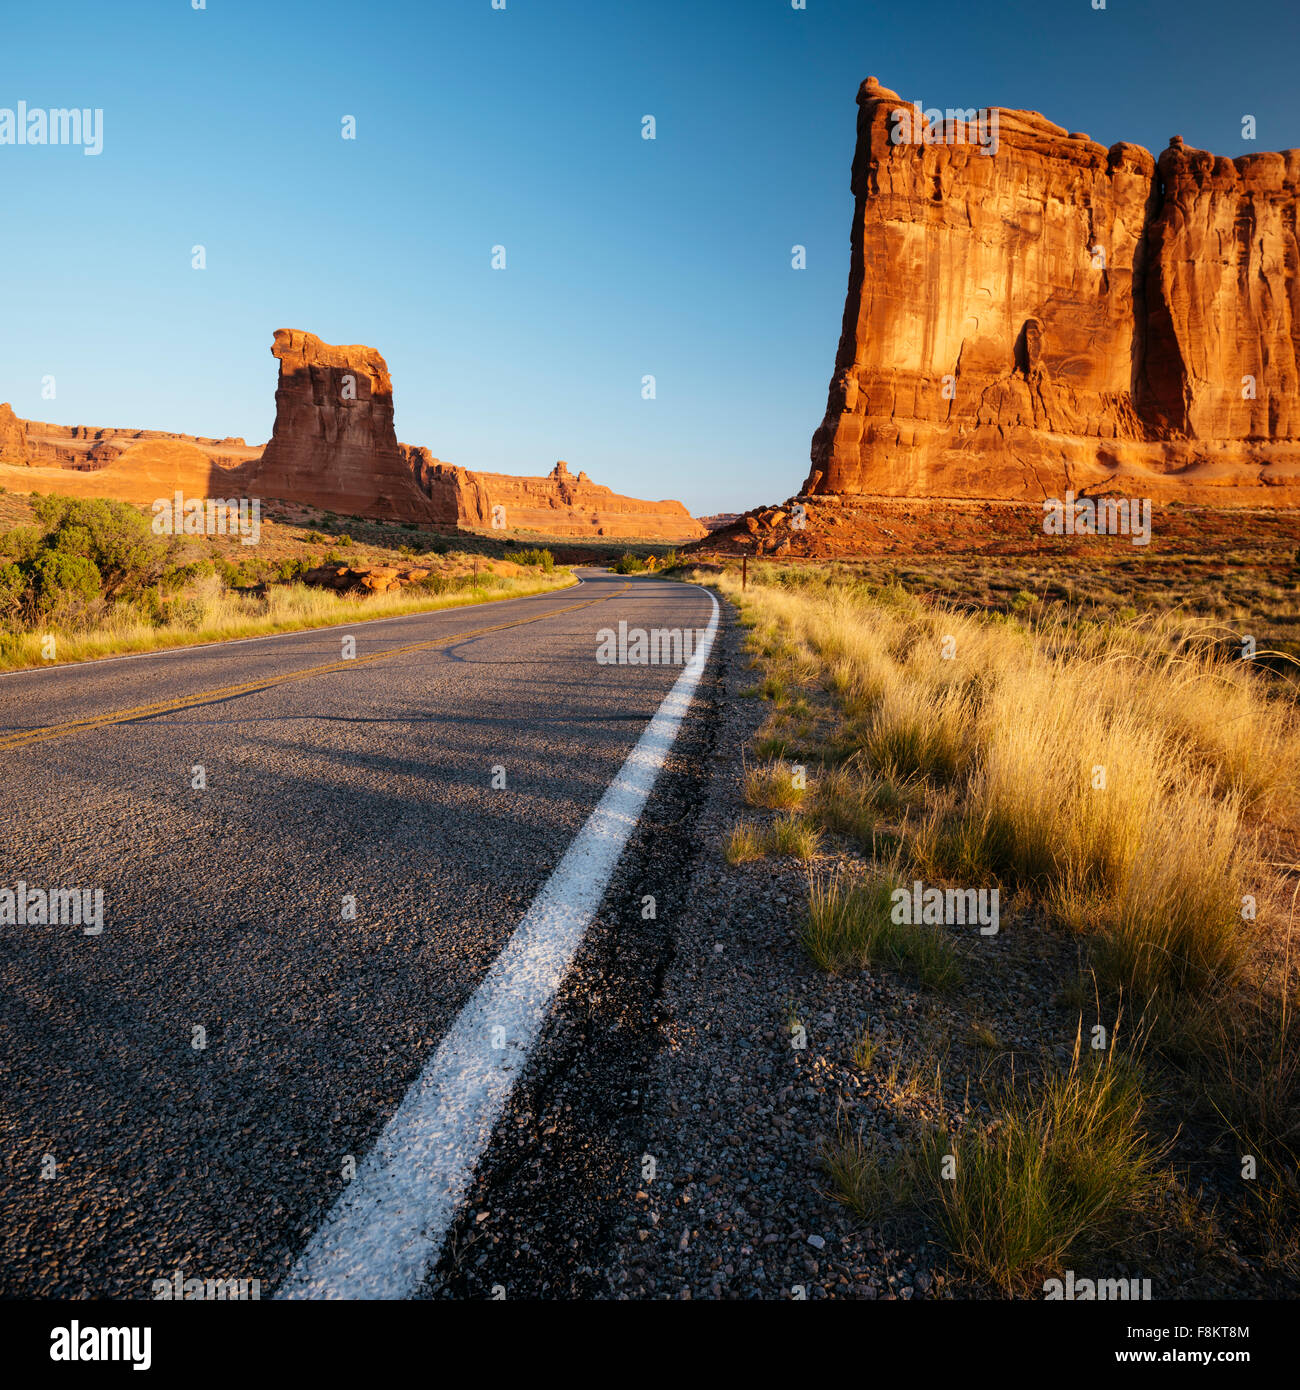 Courthouse Towers at dawn, Arches National Park, Utah, USA Stock Photo